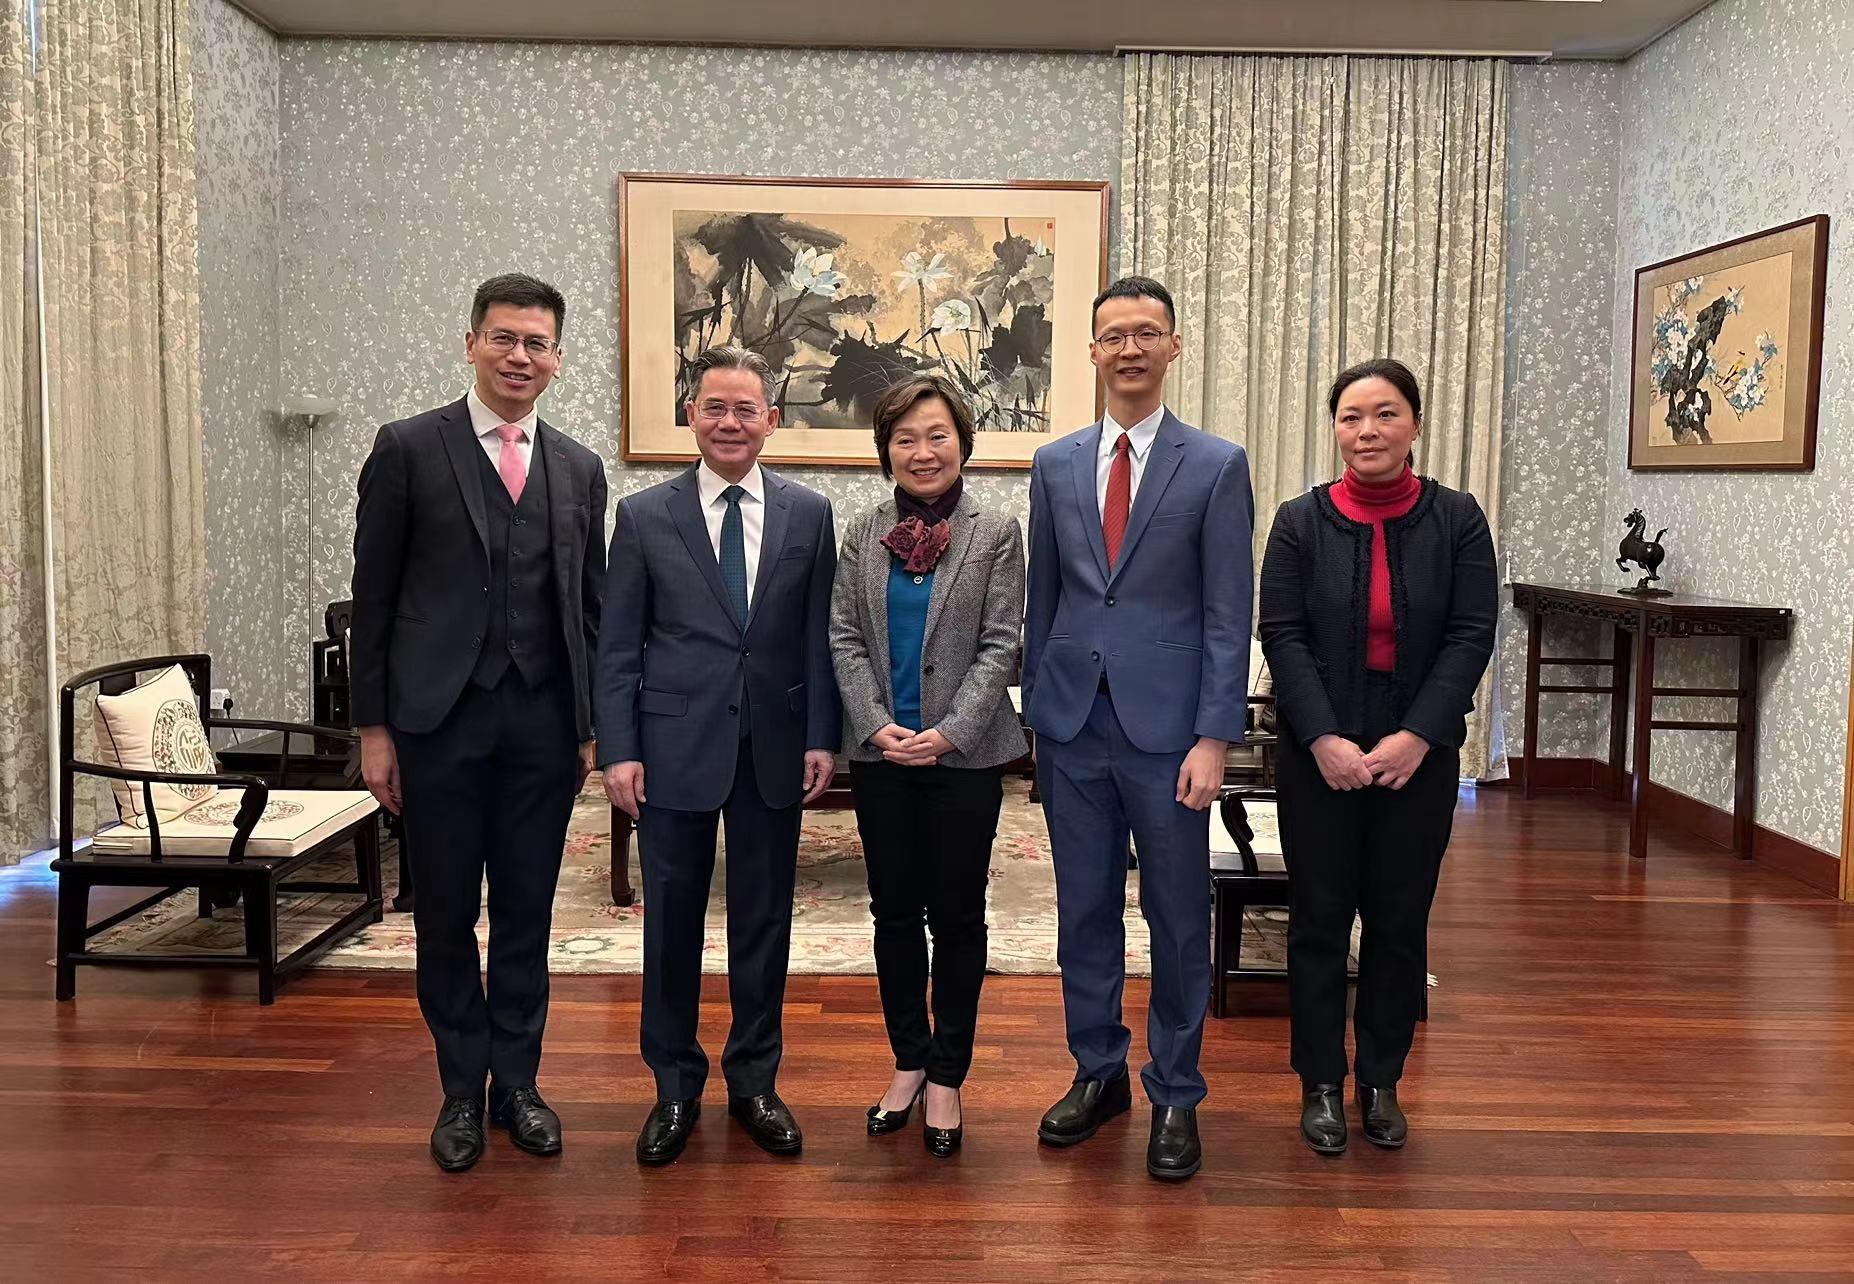 The Secretary for Education, Dr Choi Yuk-lin (centre), accompanied by the Director-General of the Hong Kong Economic and Trade Office, London, Mr Gilford Law (first left), paid a courtesy call to the Chinese Ambassador to the United Kingdom, Mr Zheng Zeguang (second left), in London, the United Kingdom, on January 24 (London time).